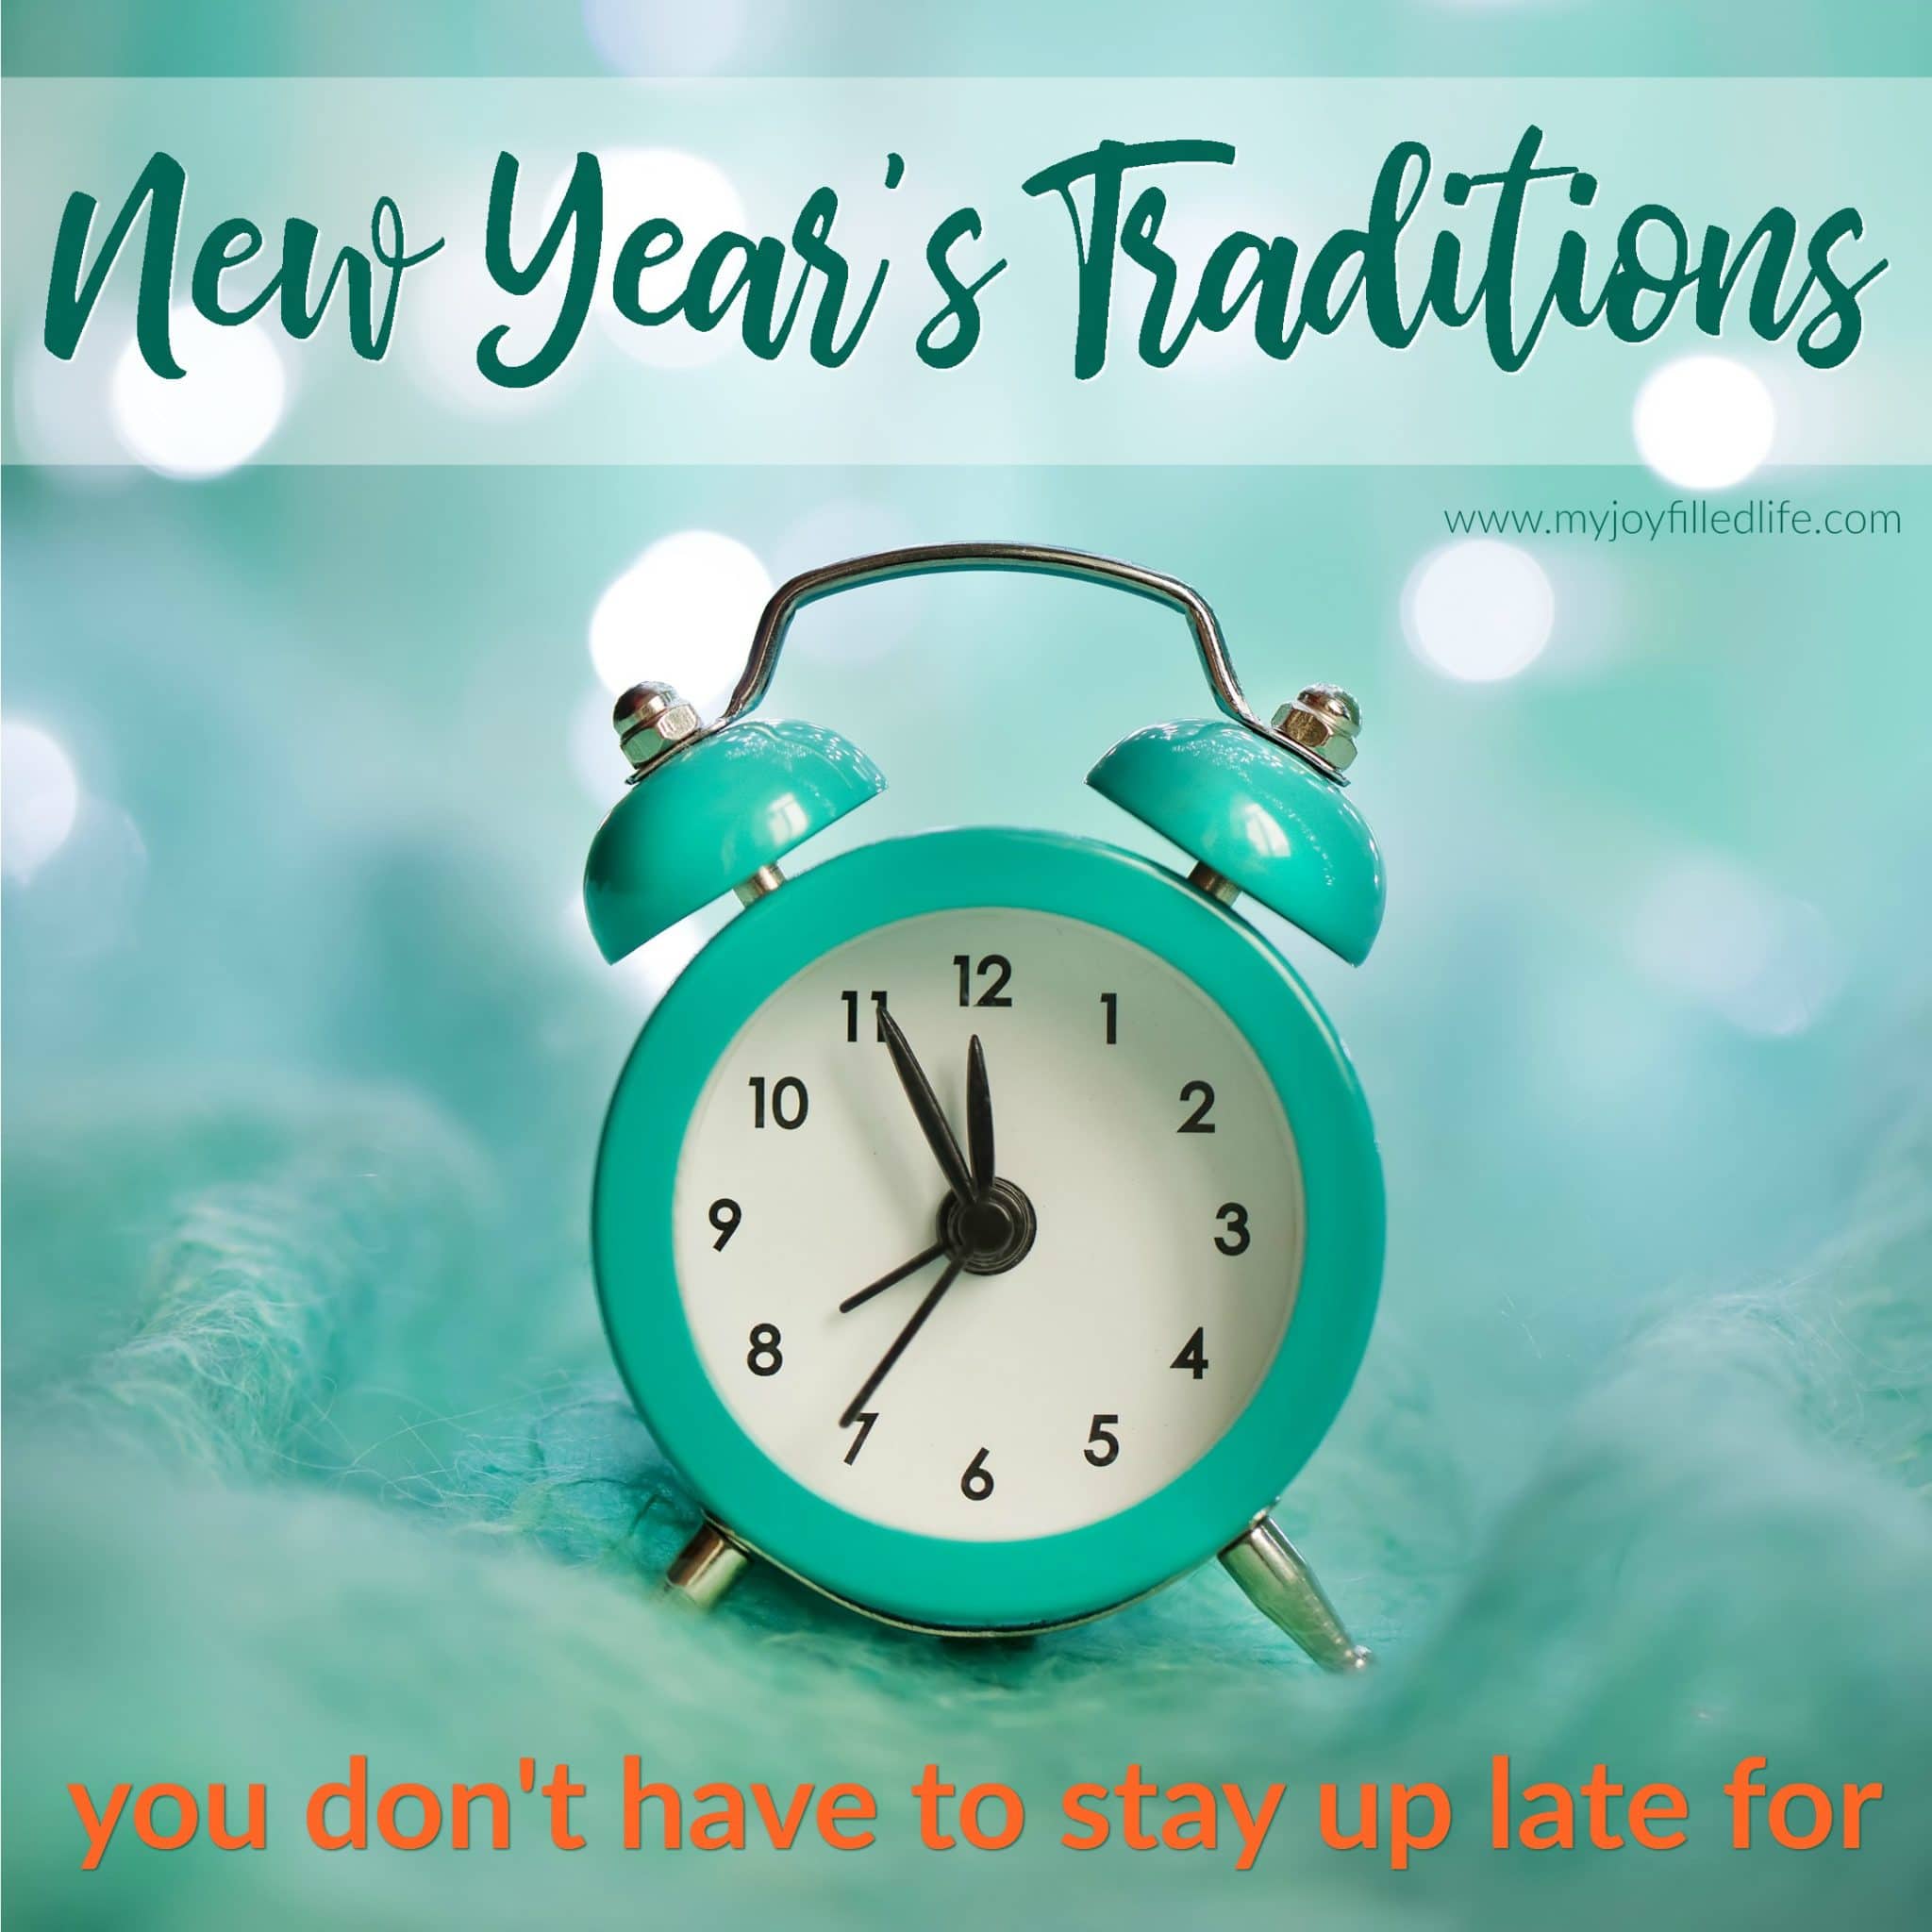 New Year’s Traditions You Don’t Have to Stay Up Late For